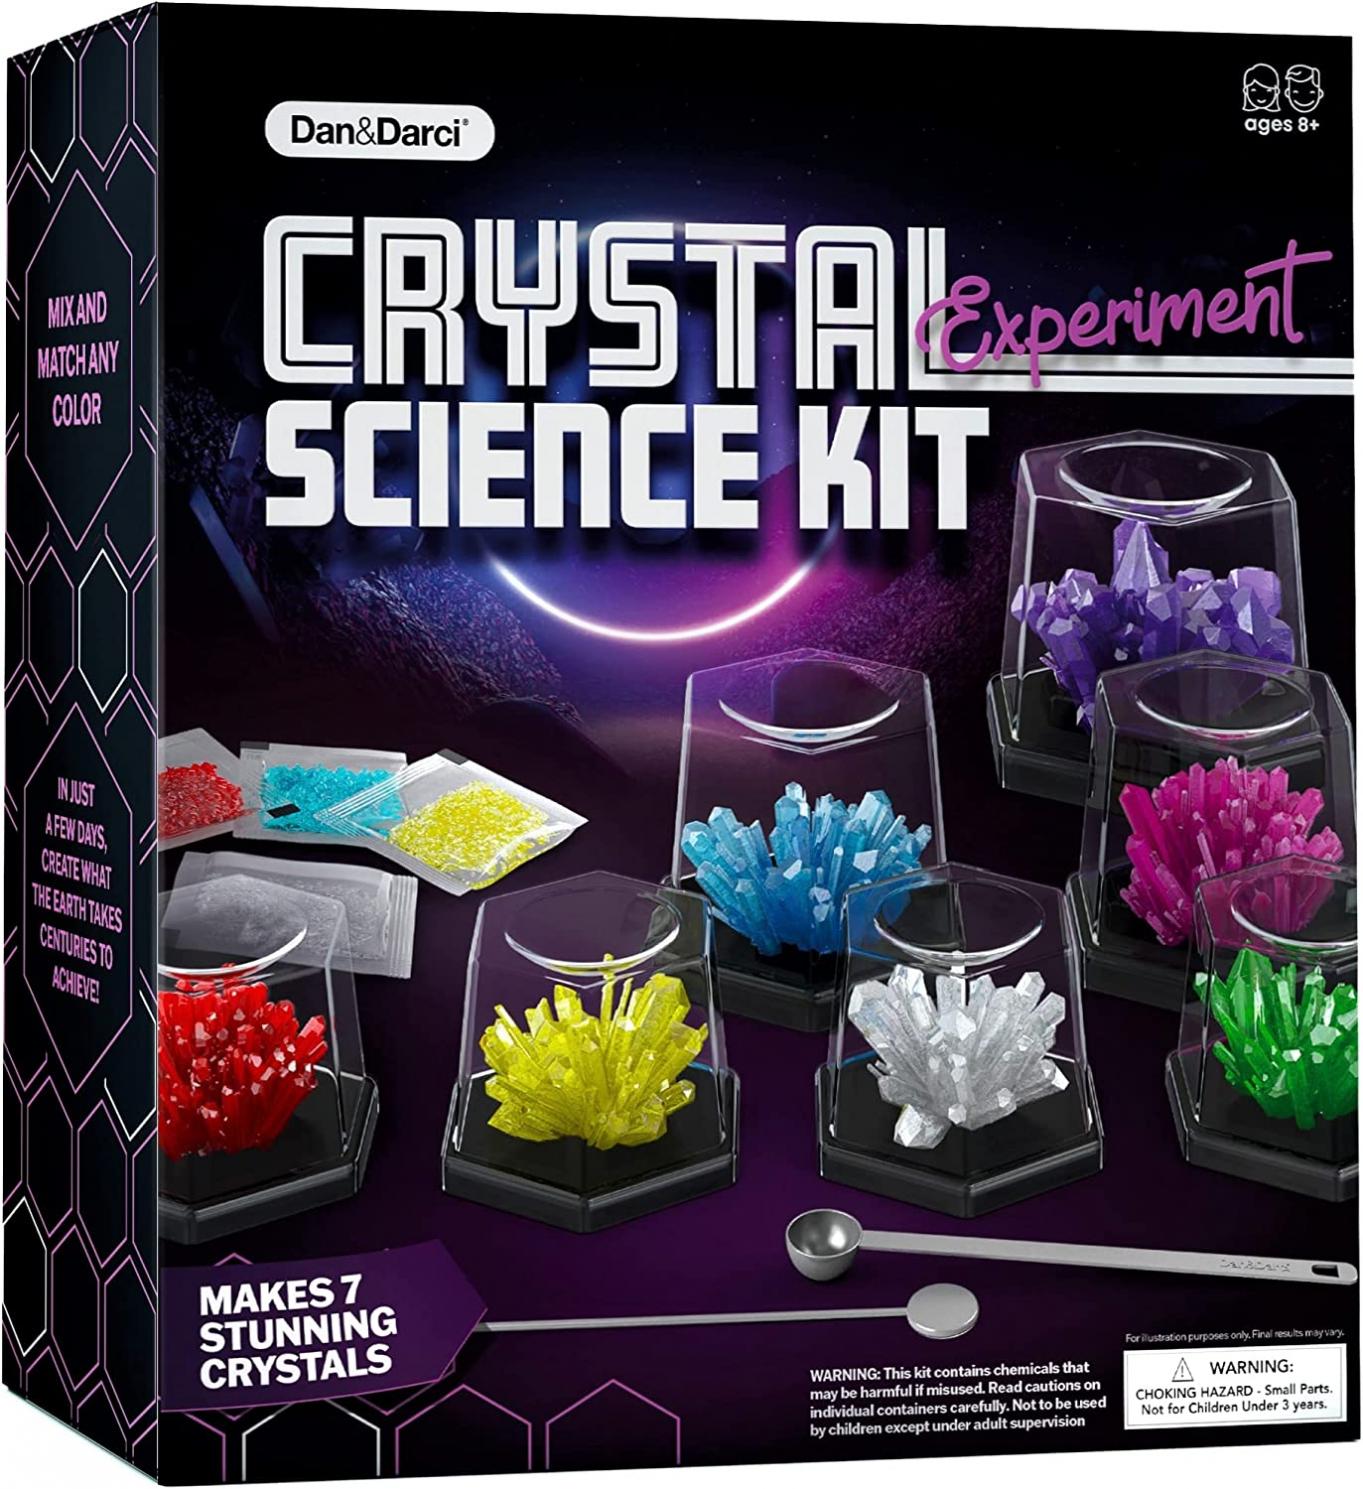 Crystal Growing Kit for Kids - Science Experiments Gifts for Boys & Girls Ages 8-14 Year Old - Discovery STEM Toys for Kids & Teen Age Boy/Girl Arts & Crafts Kits - Cool Educational Ideas